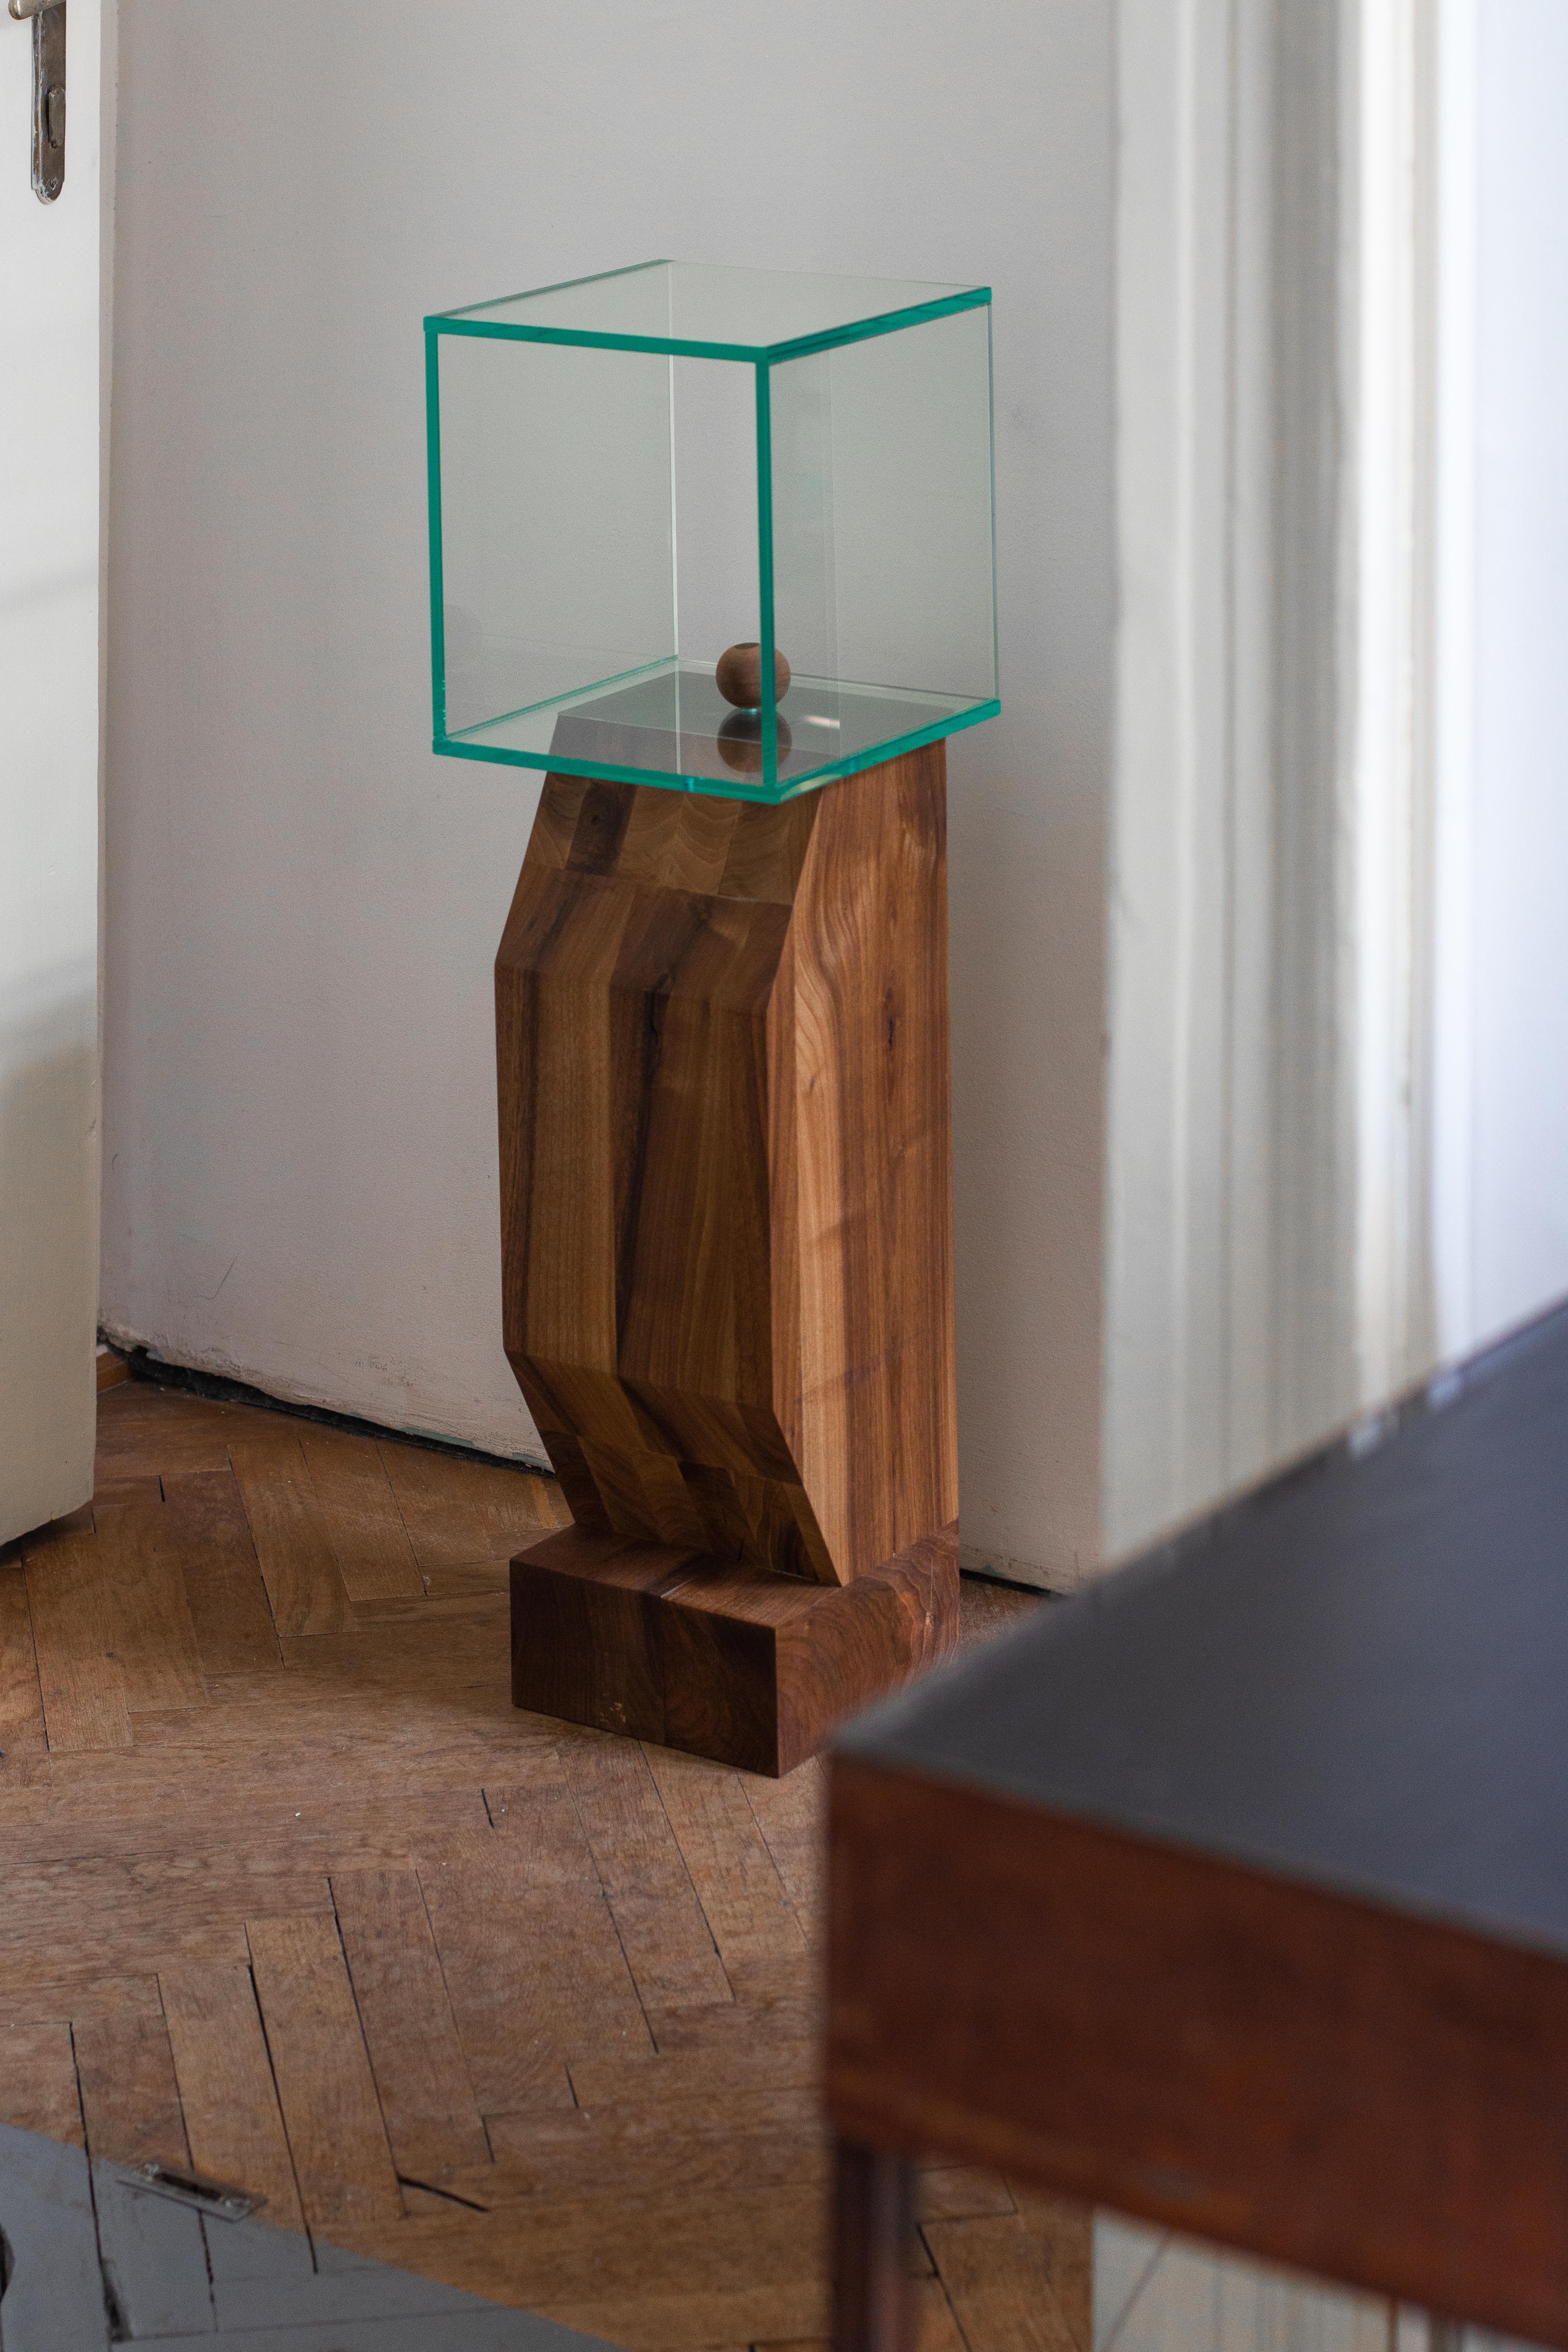 Wood and glass figure is an object part of a short family of two, that has a masive volume of walnut wood, finished with a glass cube on top. The wood volume was made out of raw planks of wood that were glued together and cut into the final shape.